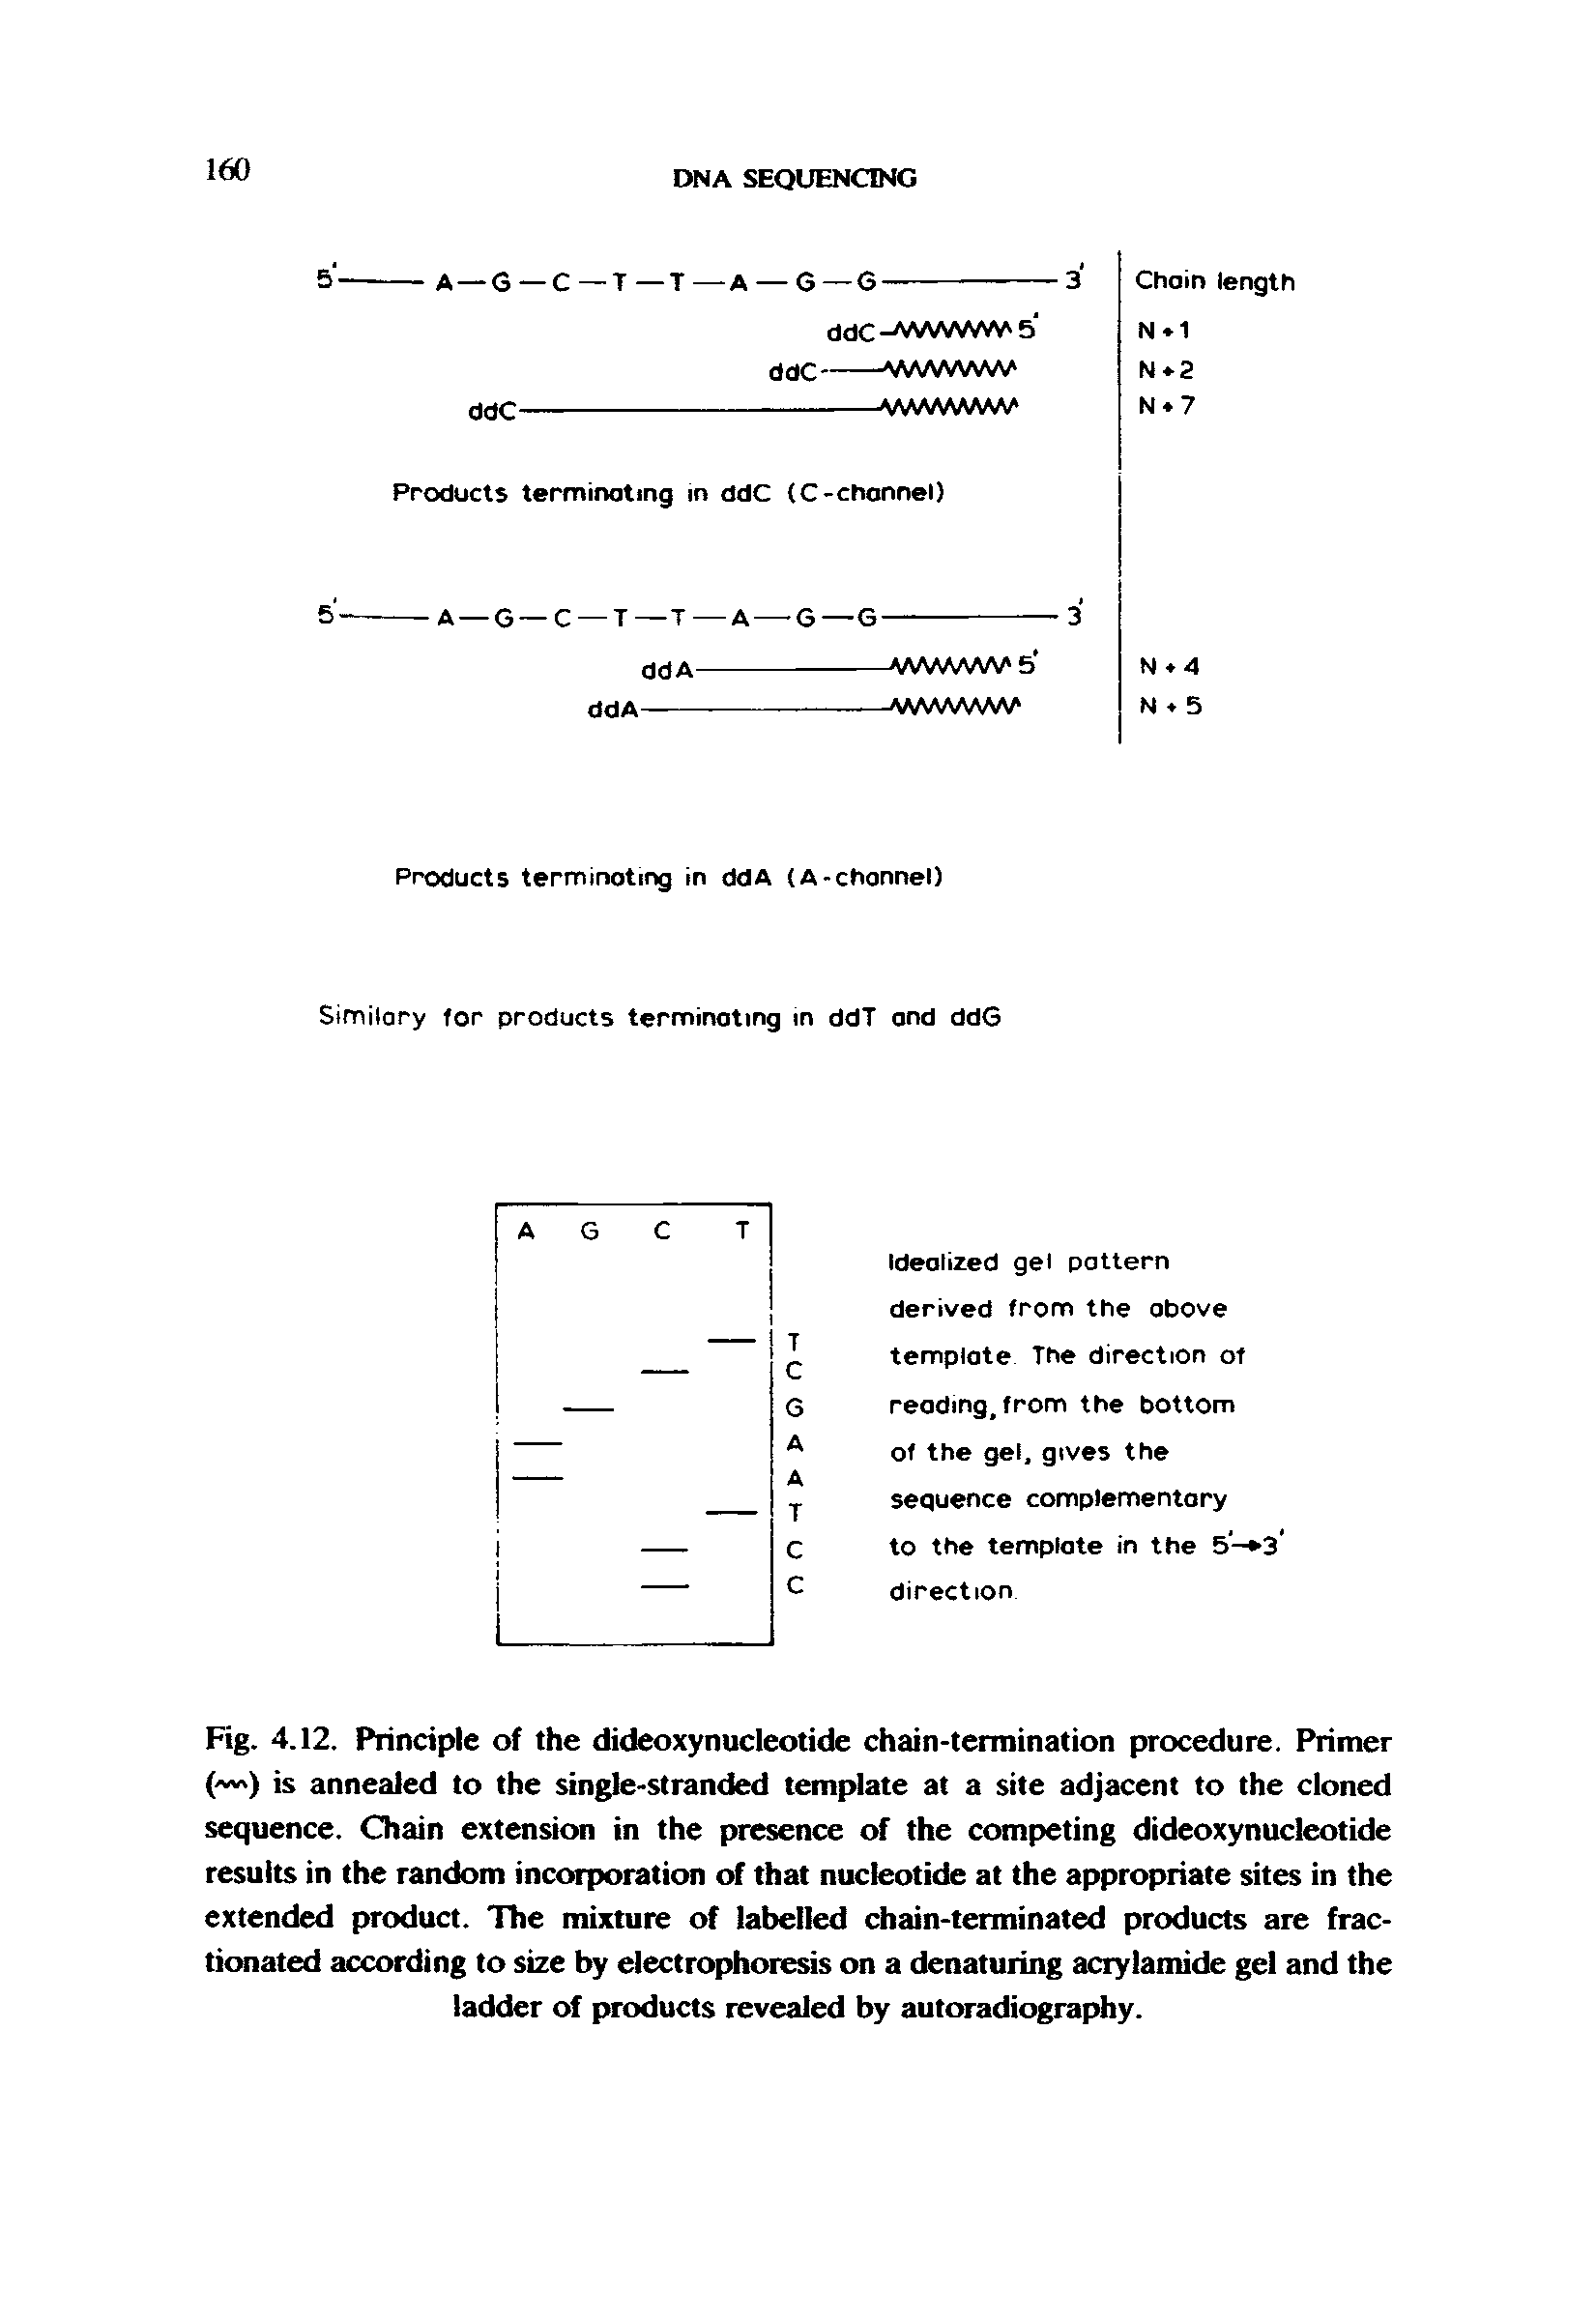 Fig. 4.12. Principle of the dideoxynucleotide chain-termination procedure. Primer ( ) is annealed to the single-stranded template at a site adjacent to the cloned sequence. Chain extension in the presence of the competing dideoxynucleotide results in the random incorporation of that nucleotide at the appropriate sites in the extended product. The mixture of labelled chain-terminated products are fractionated according to size by electrophoresis on a denaturing acrylamide gel and the ladder of products revealed by autoradiography.